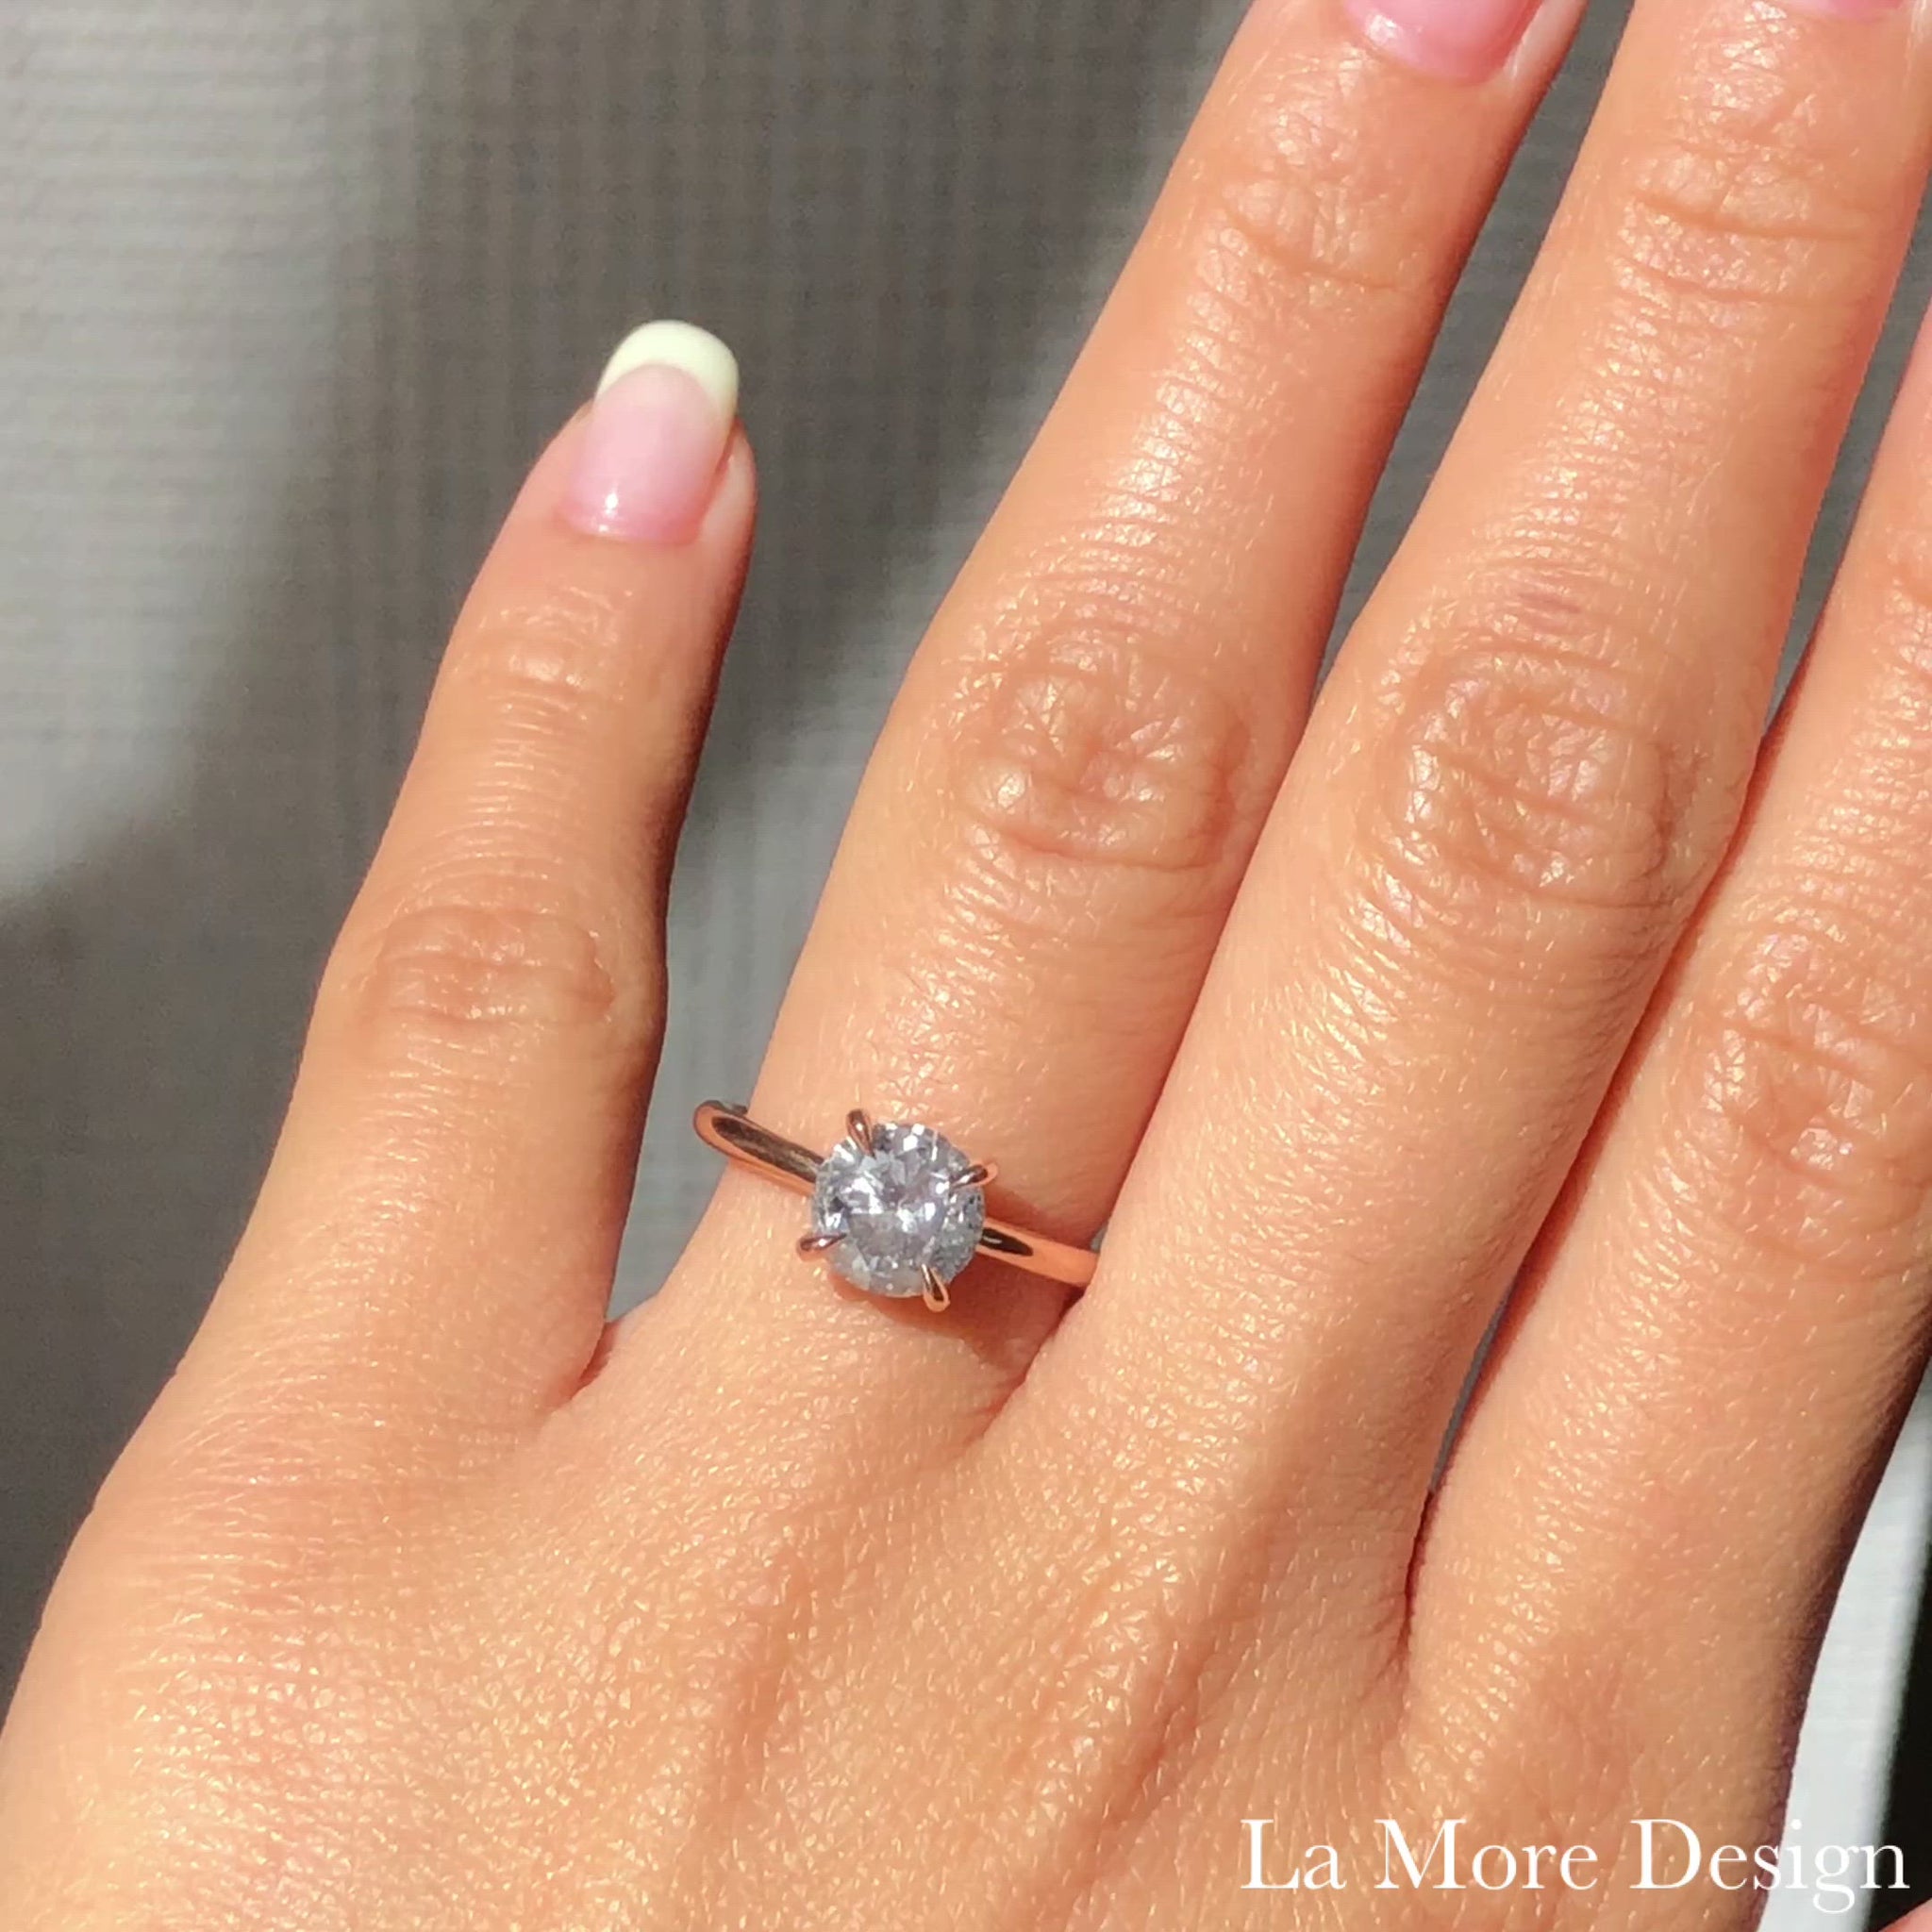 This stunningly gorgeous grey diamond engagement ring features a large 1.81 carat round cut natural salt and pepper diamond set in a 14k rose gold flat set low profile solitaire ring setting that lays flat perfectly on top of your finger for comfortable wear. Adore your love with this large diamond ring today!